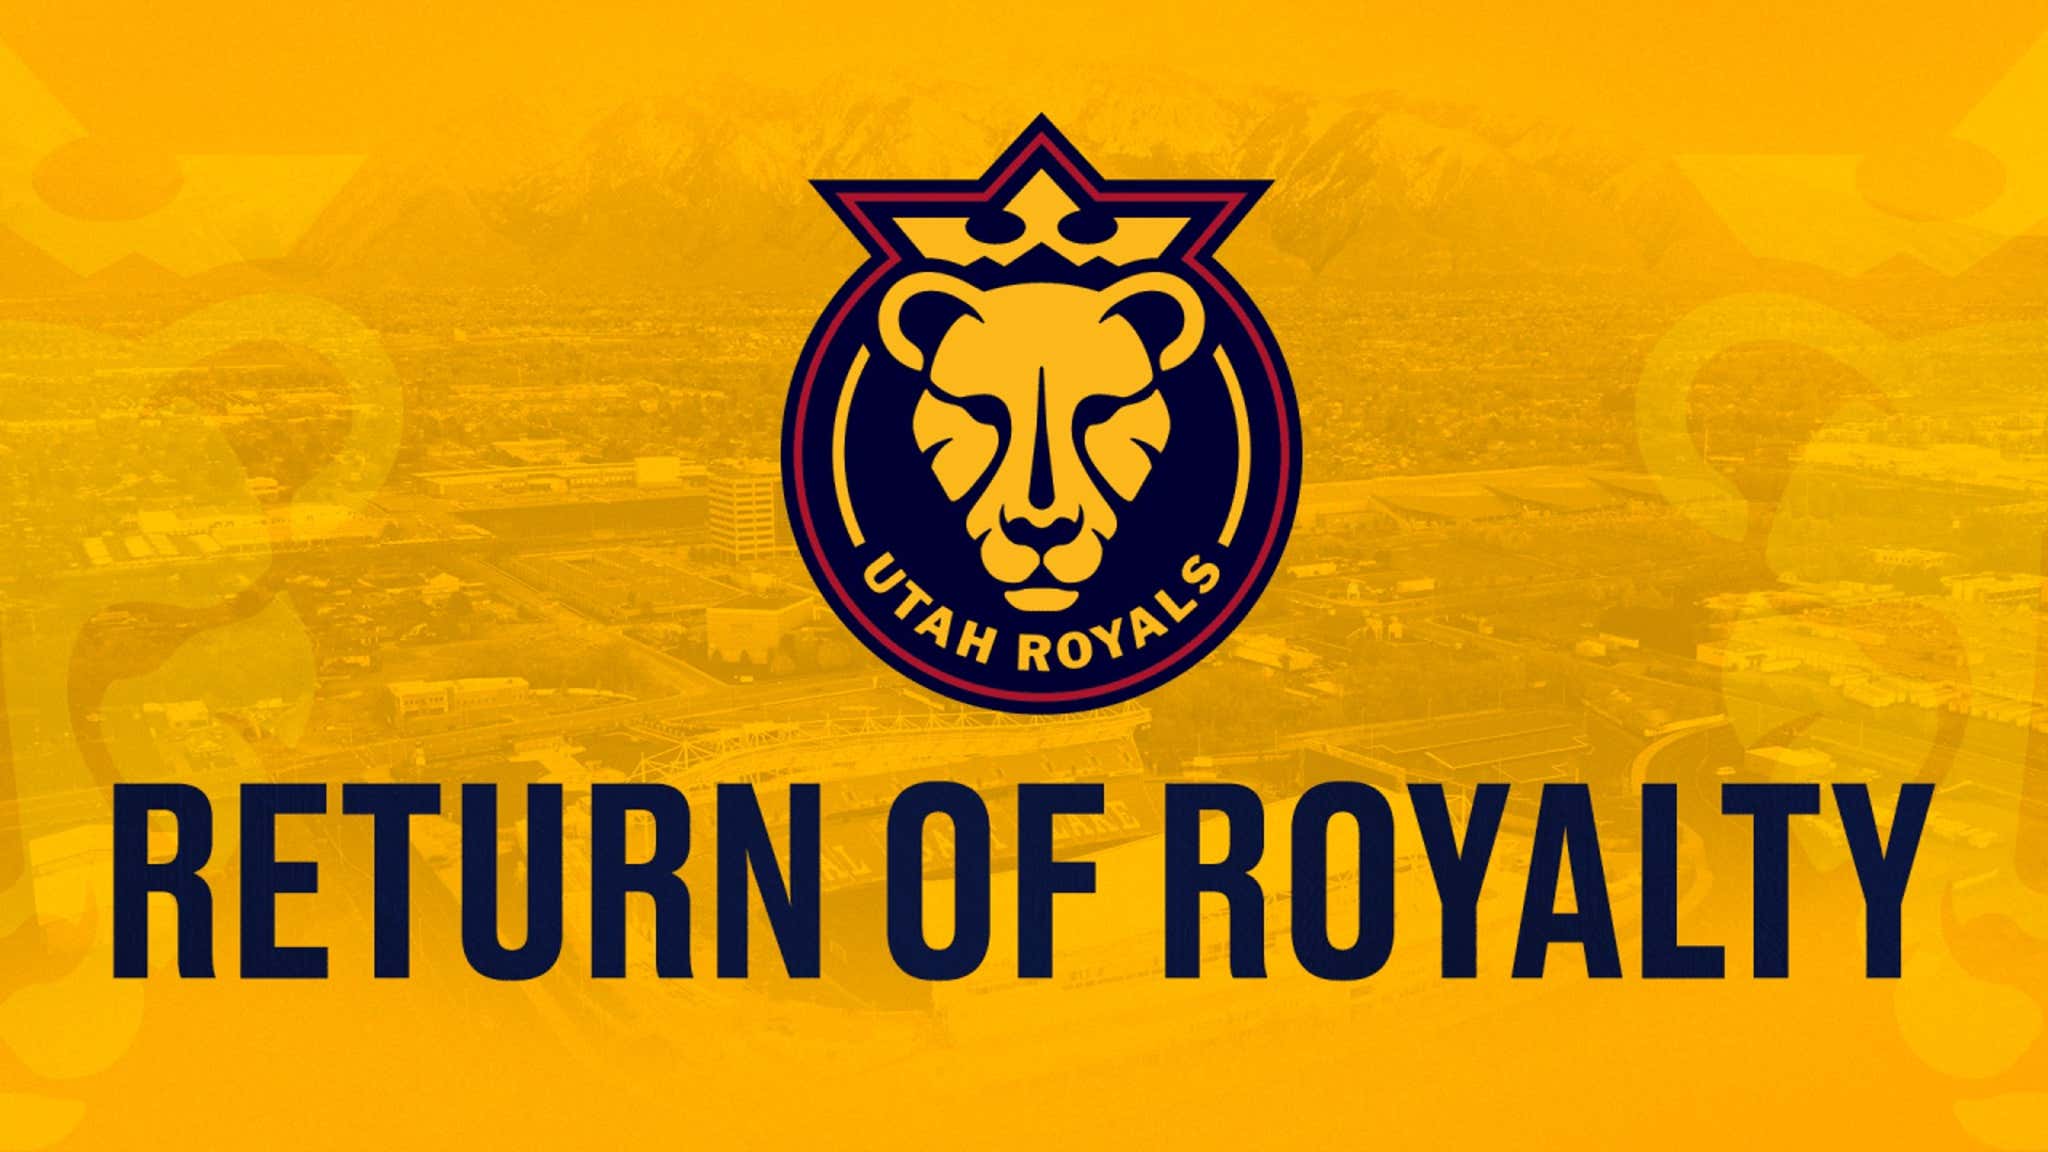 They're back! Utah Royals back in NWSL as league revives club with